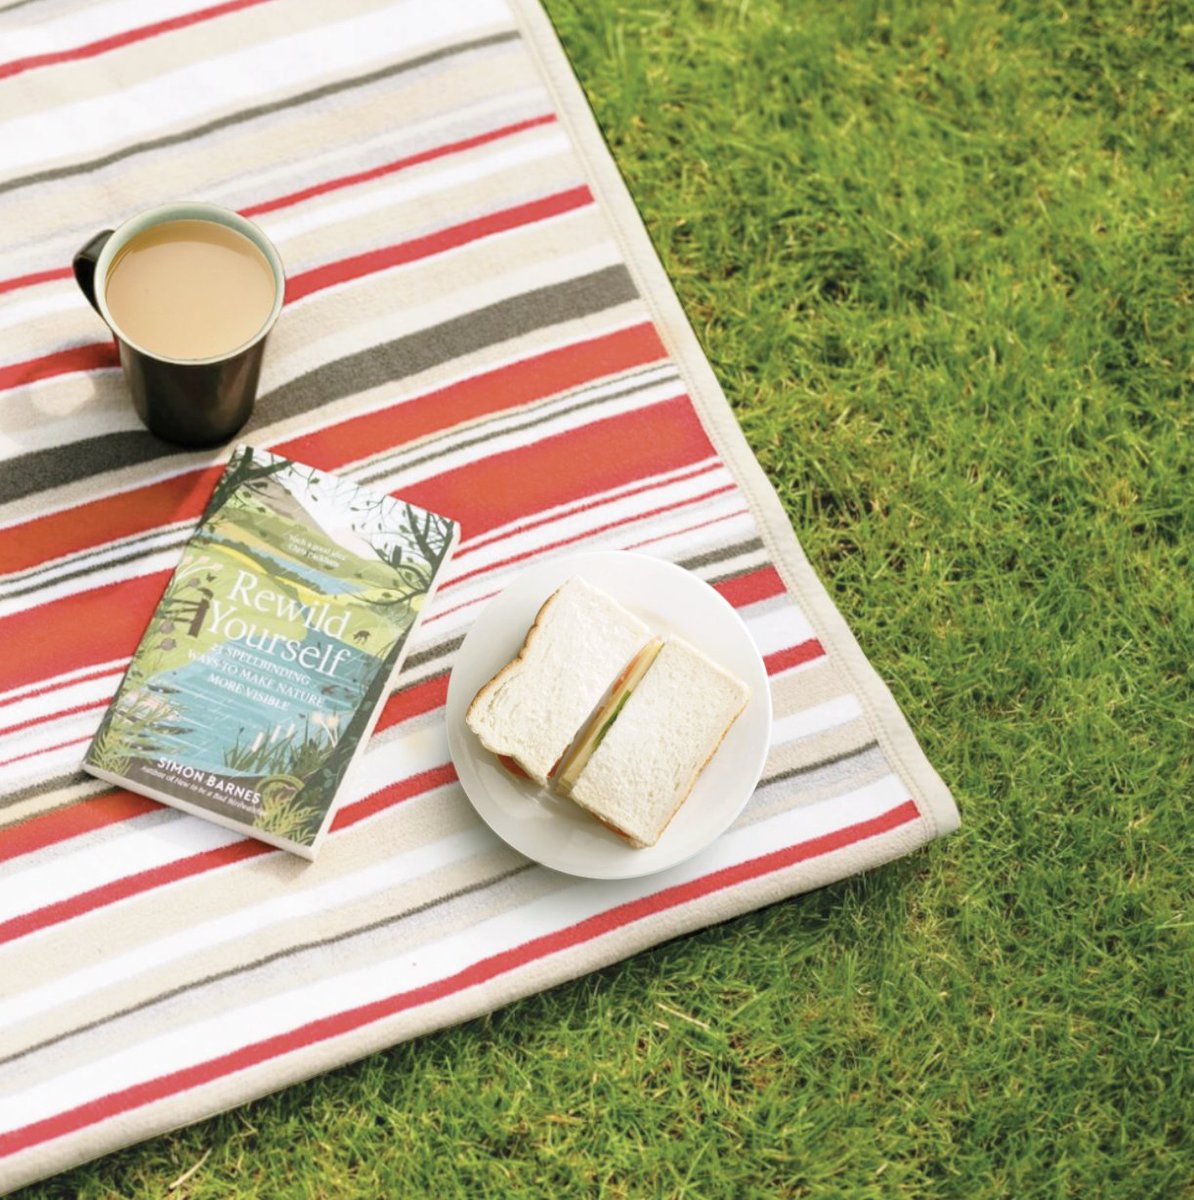 Yes, the UK has some breath taking beaches and countryside and yes, we have some beautiful parks and outside public spaces… but is there a better #picnic spot than a freshly mowed garden lawn? 

Especially when you need a refill!

#nationalpicnicweek #gardenlawn #gardengoals